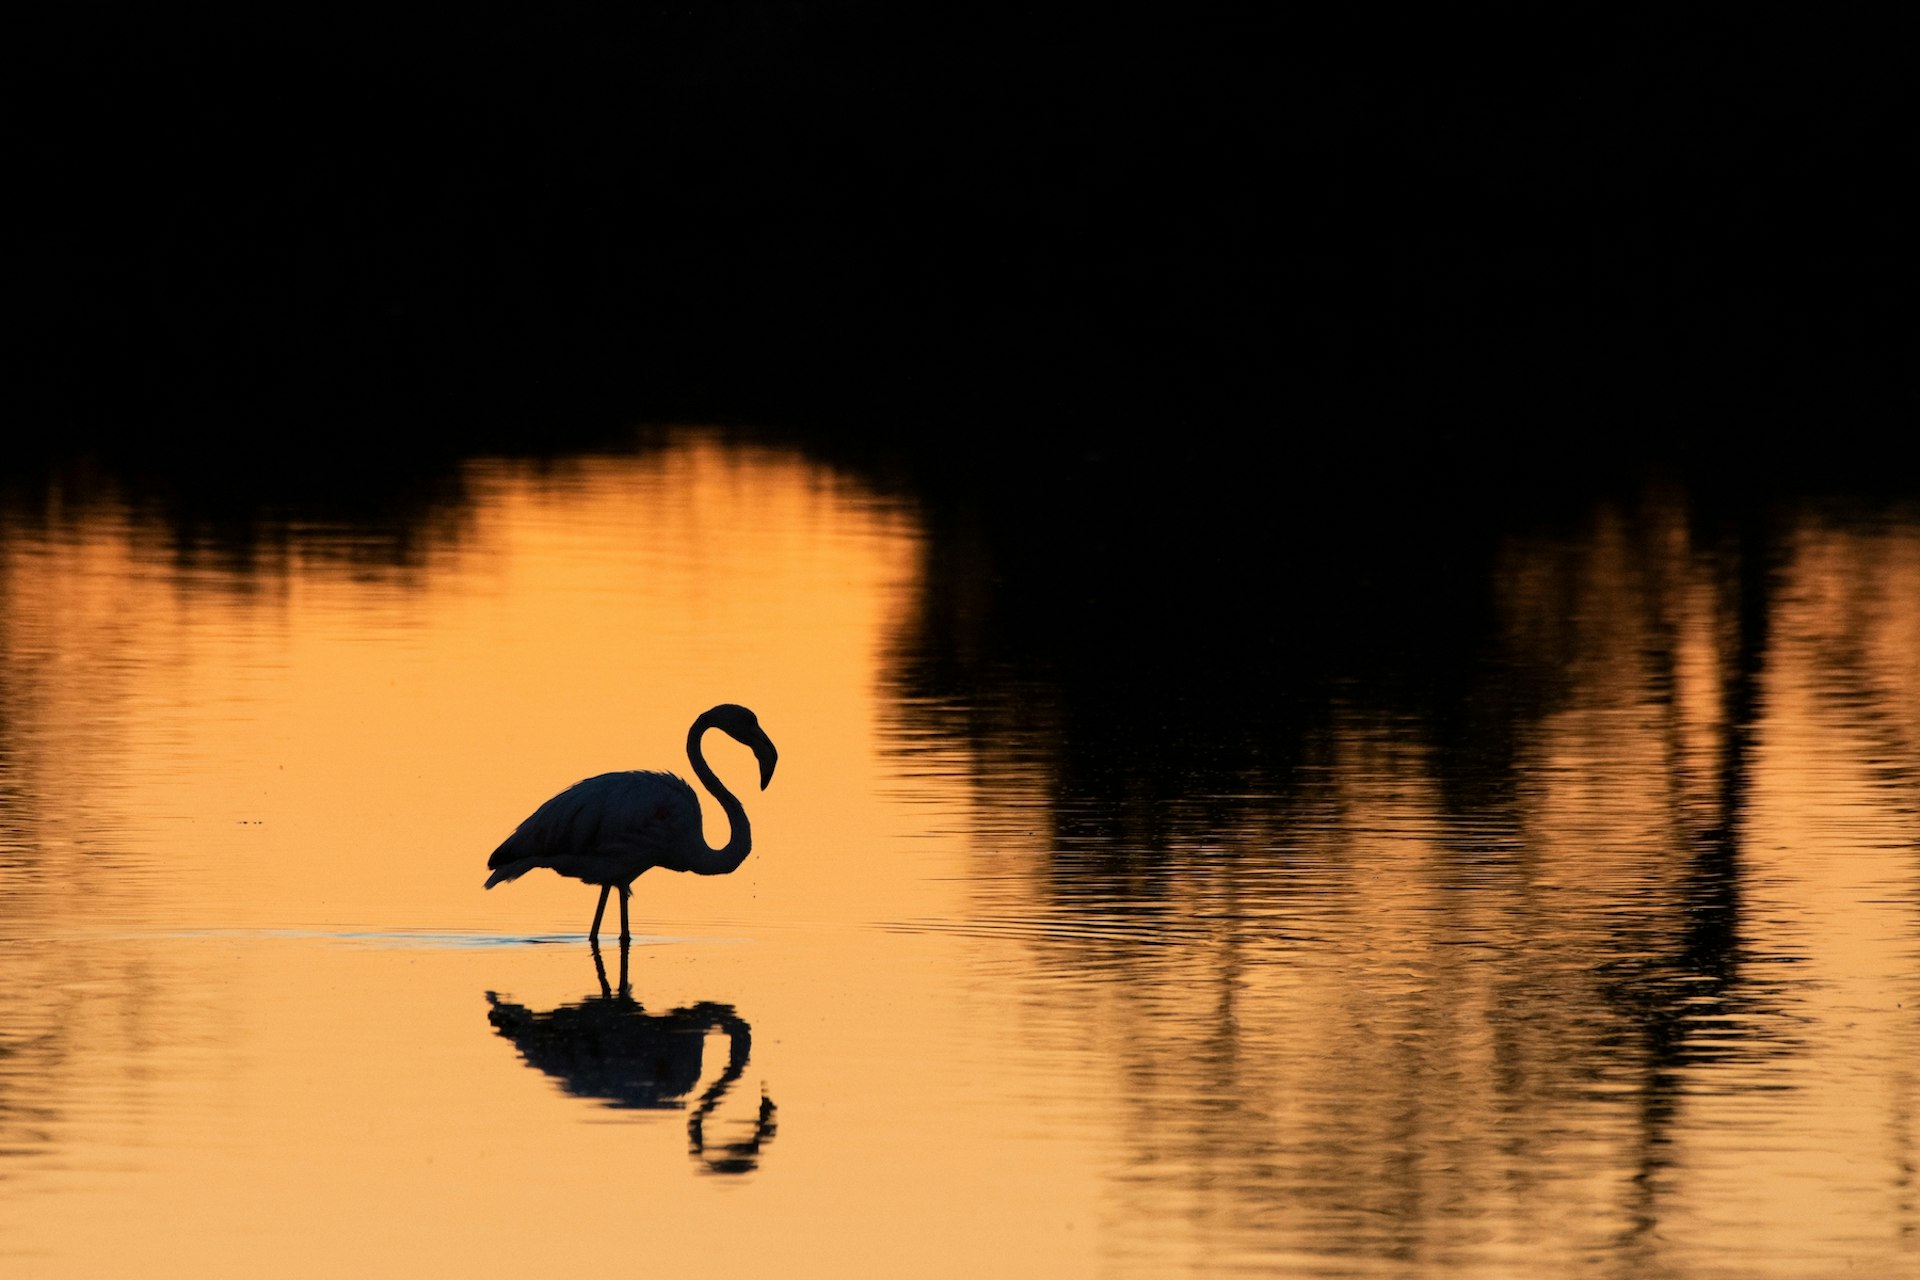 Greater Flamingo in sunset silhouette at Ria Formosa Wildlife Natural Park in the Algarve, Portugal.